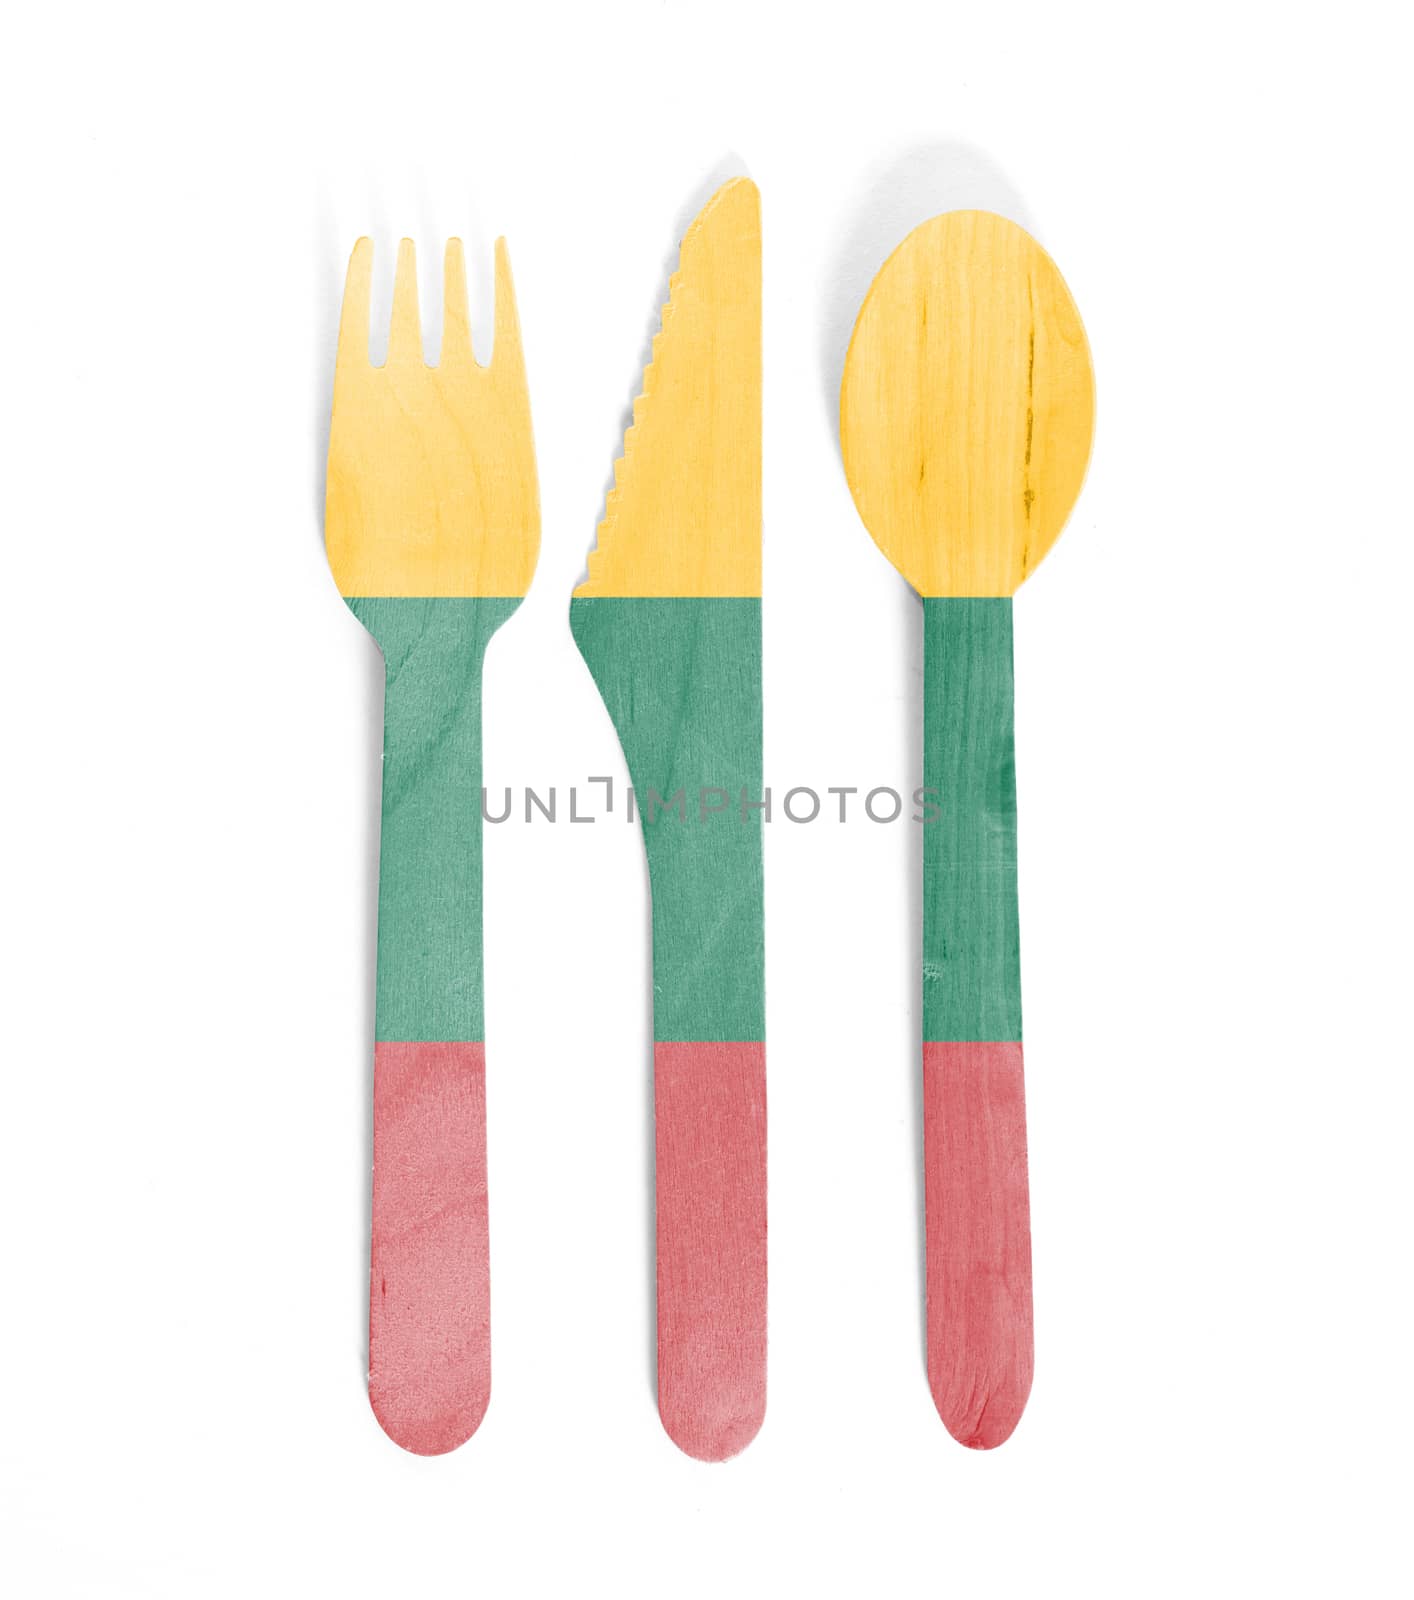 Eco friendly wooden cutlery - Plastic free concept - Flag of Lit by michaklootwijk